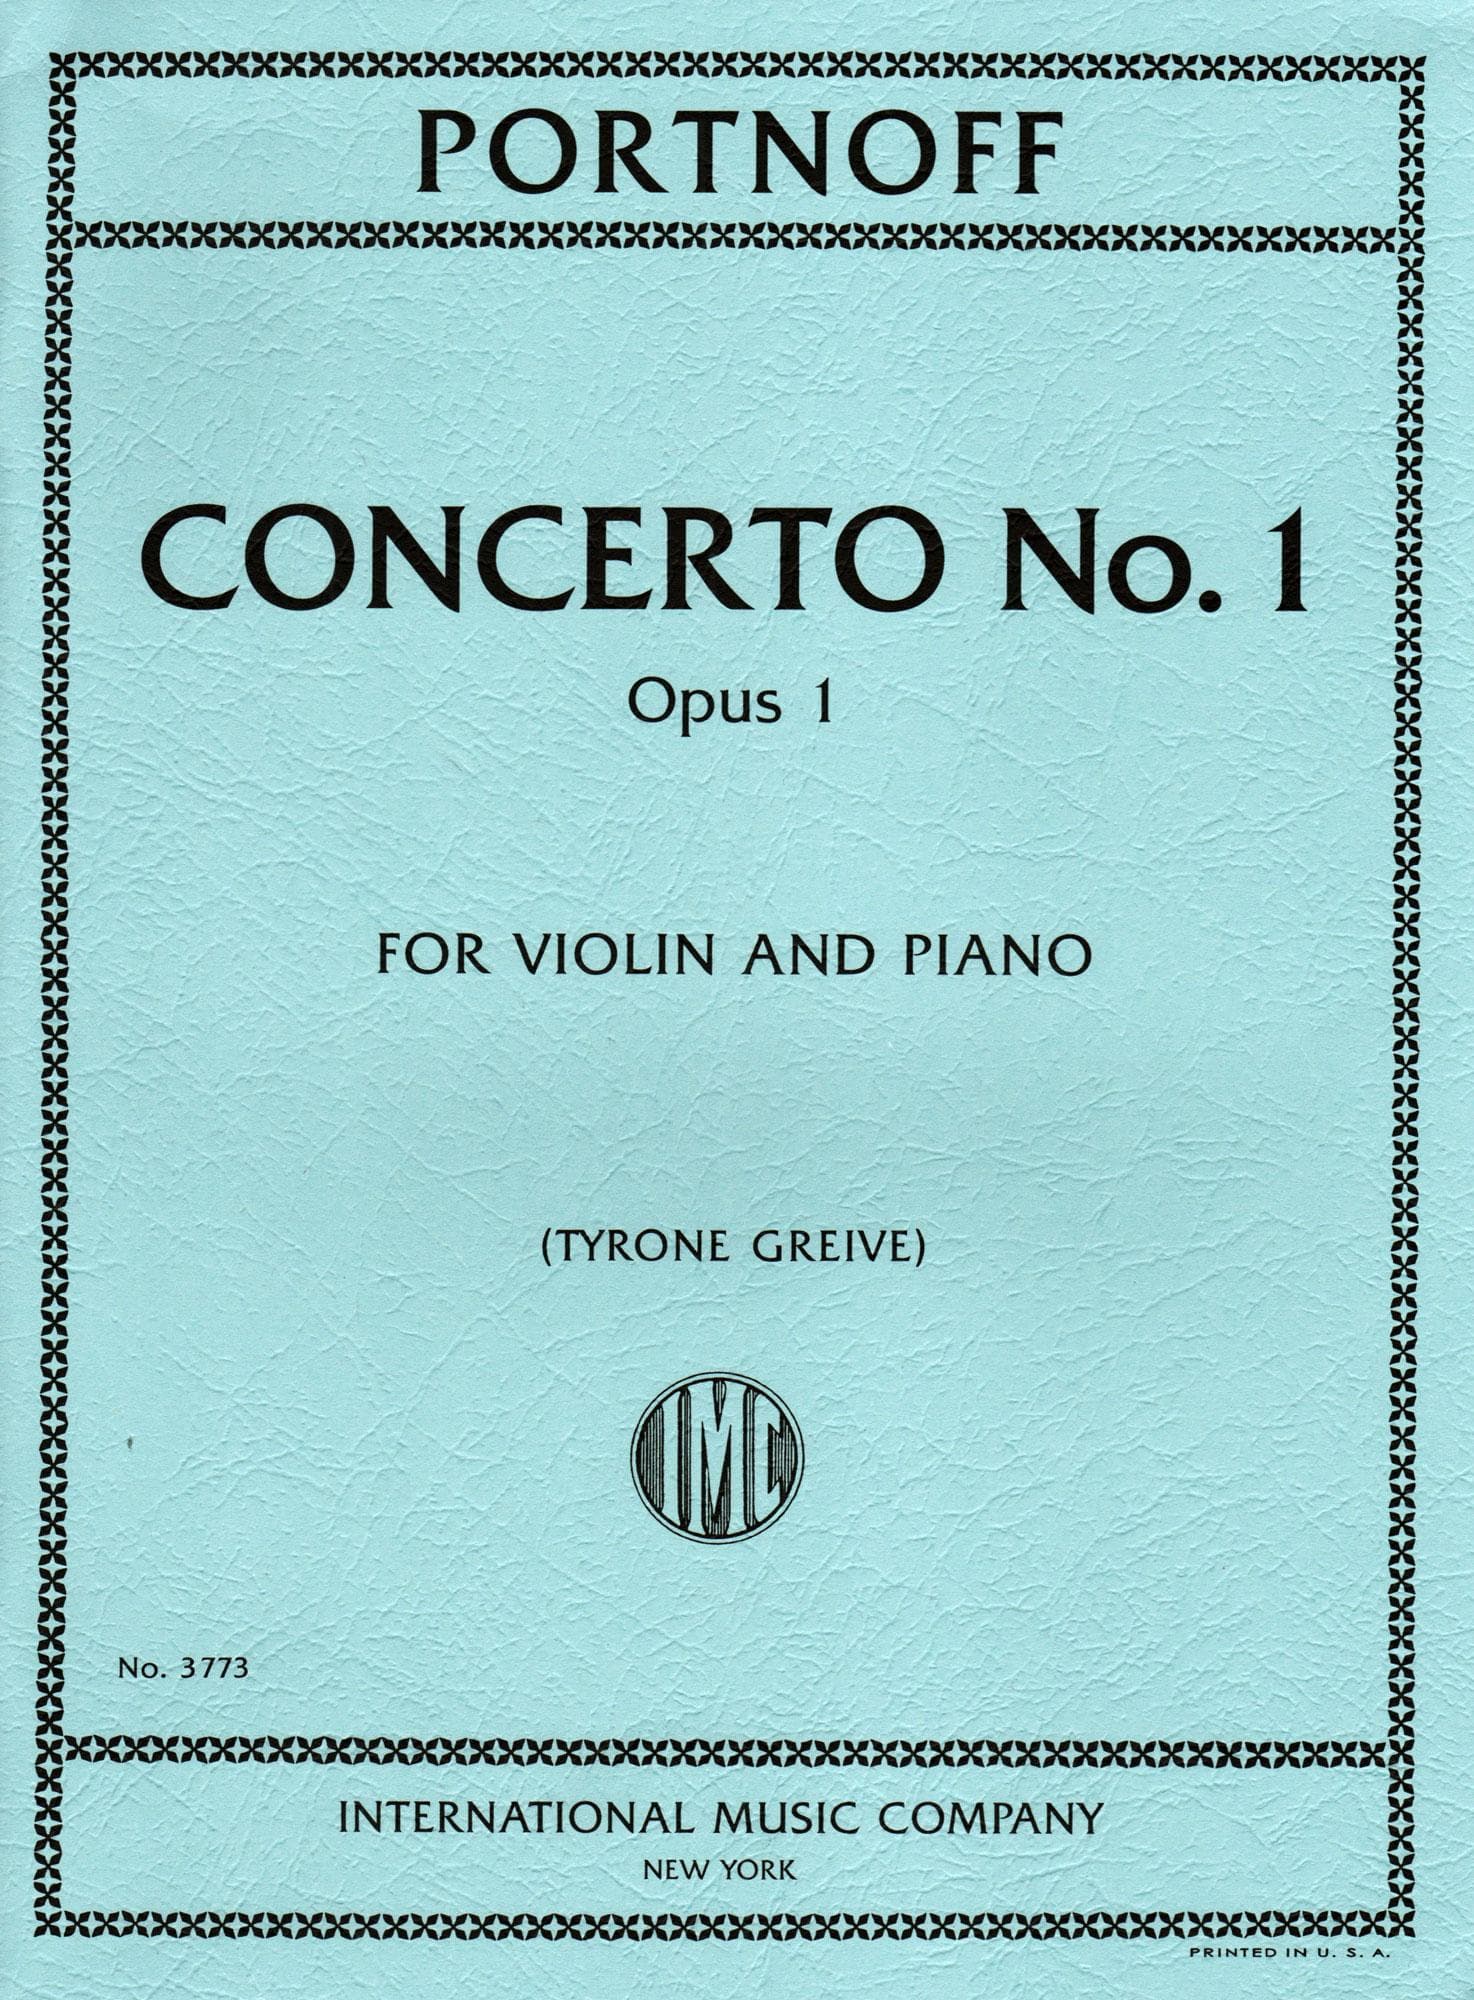 Portnoff, Leo - Concerto No. 1, Op. 1 - for Violin and Piano - edited by Greive - International